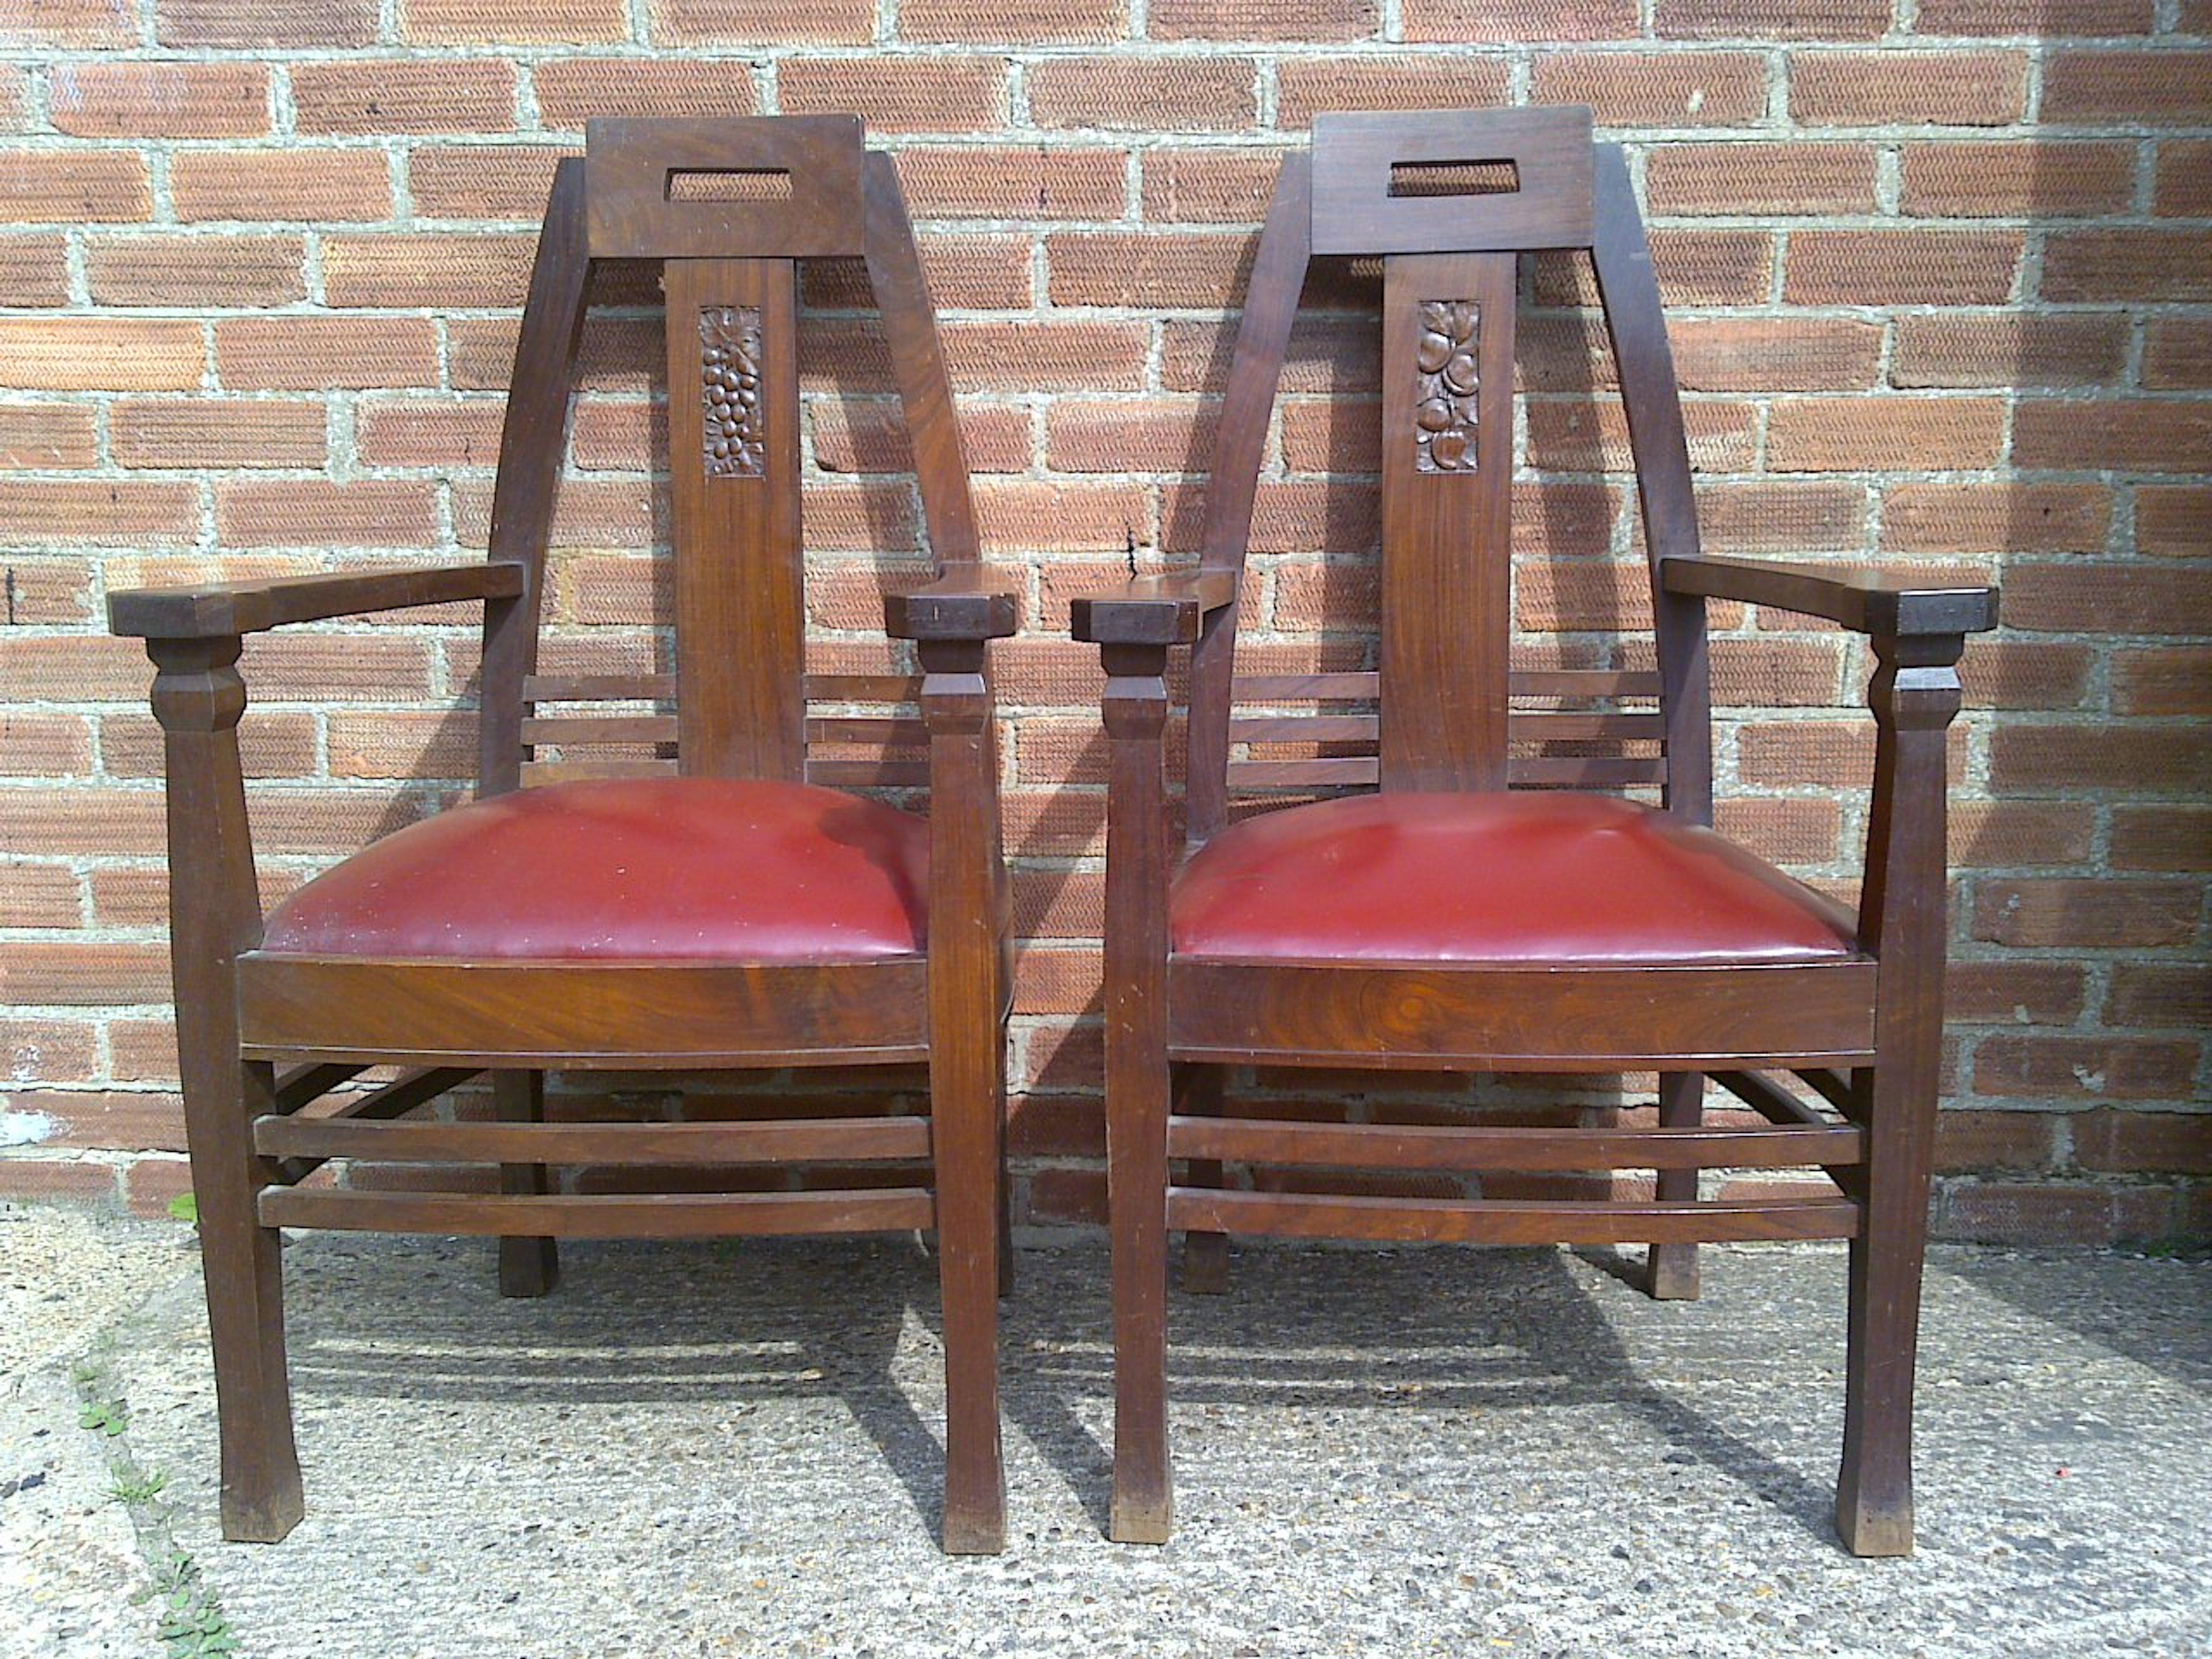 Peter Behrens, a pair of Jugendstil mahogany armchairs, the seats re-upholstered in red leather.
See White way, Michael and Gere, Charlotte '19th century design from Pugin to Mackintosh' London 1993, p. 262, plate 333 for a side chair of a similar